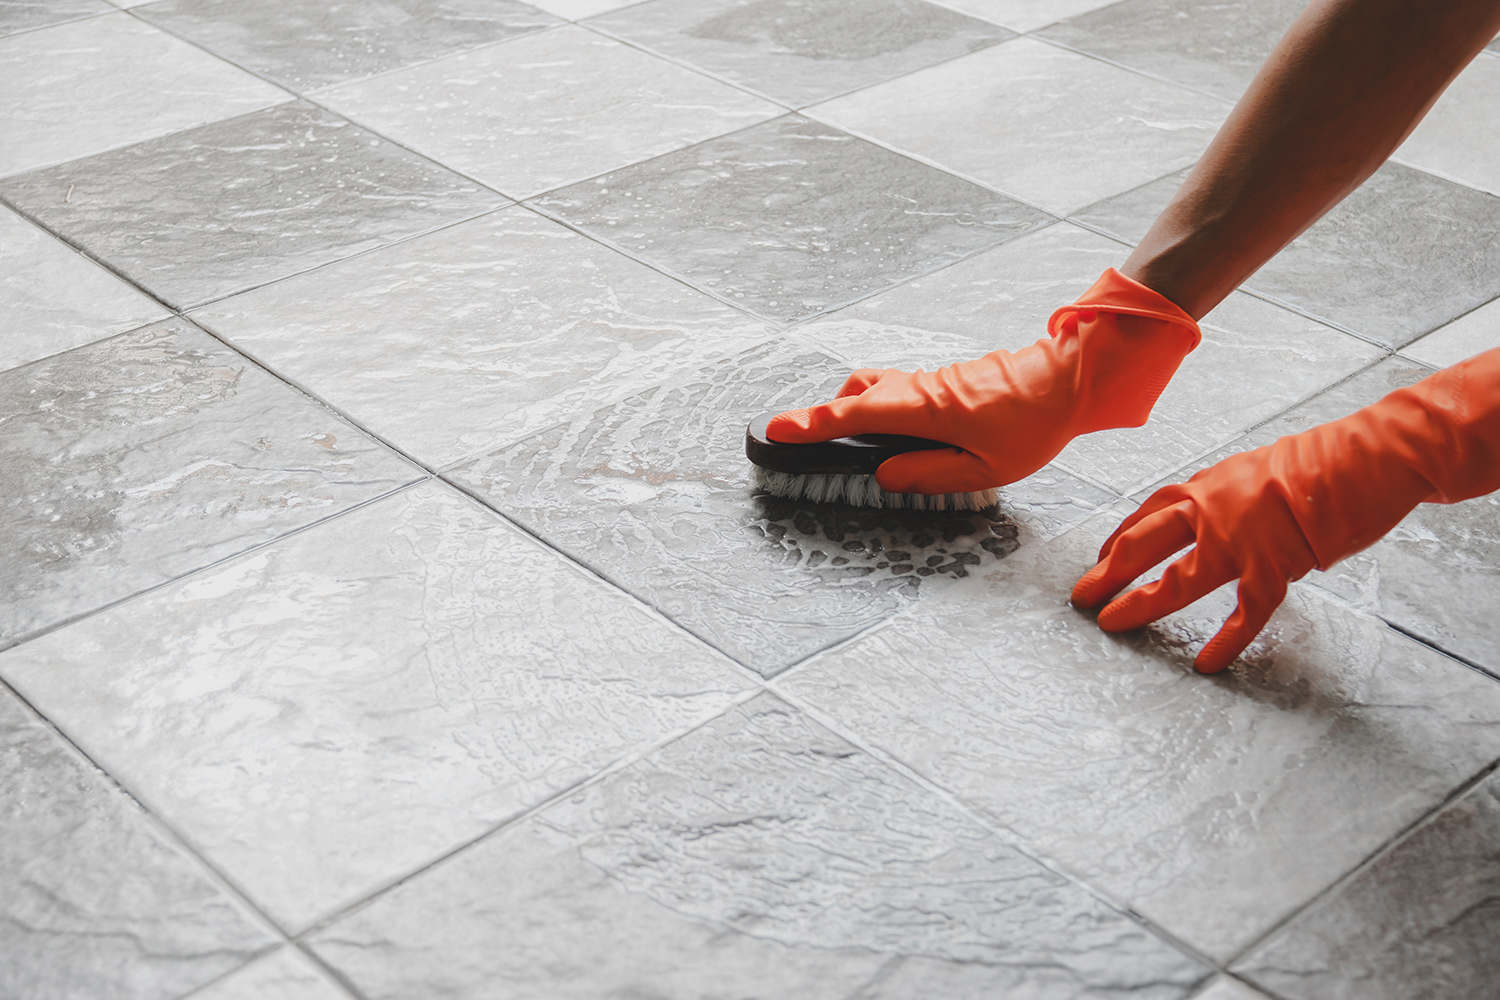 Tile-Grout-Cleaning